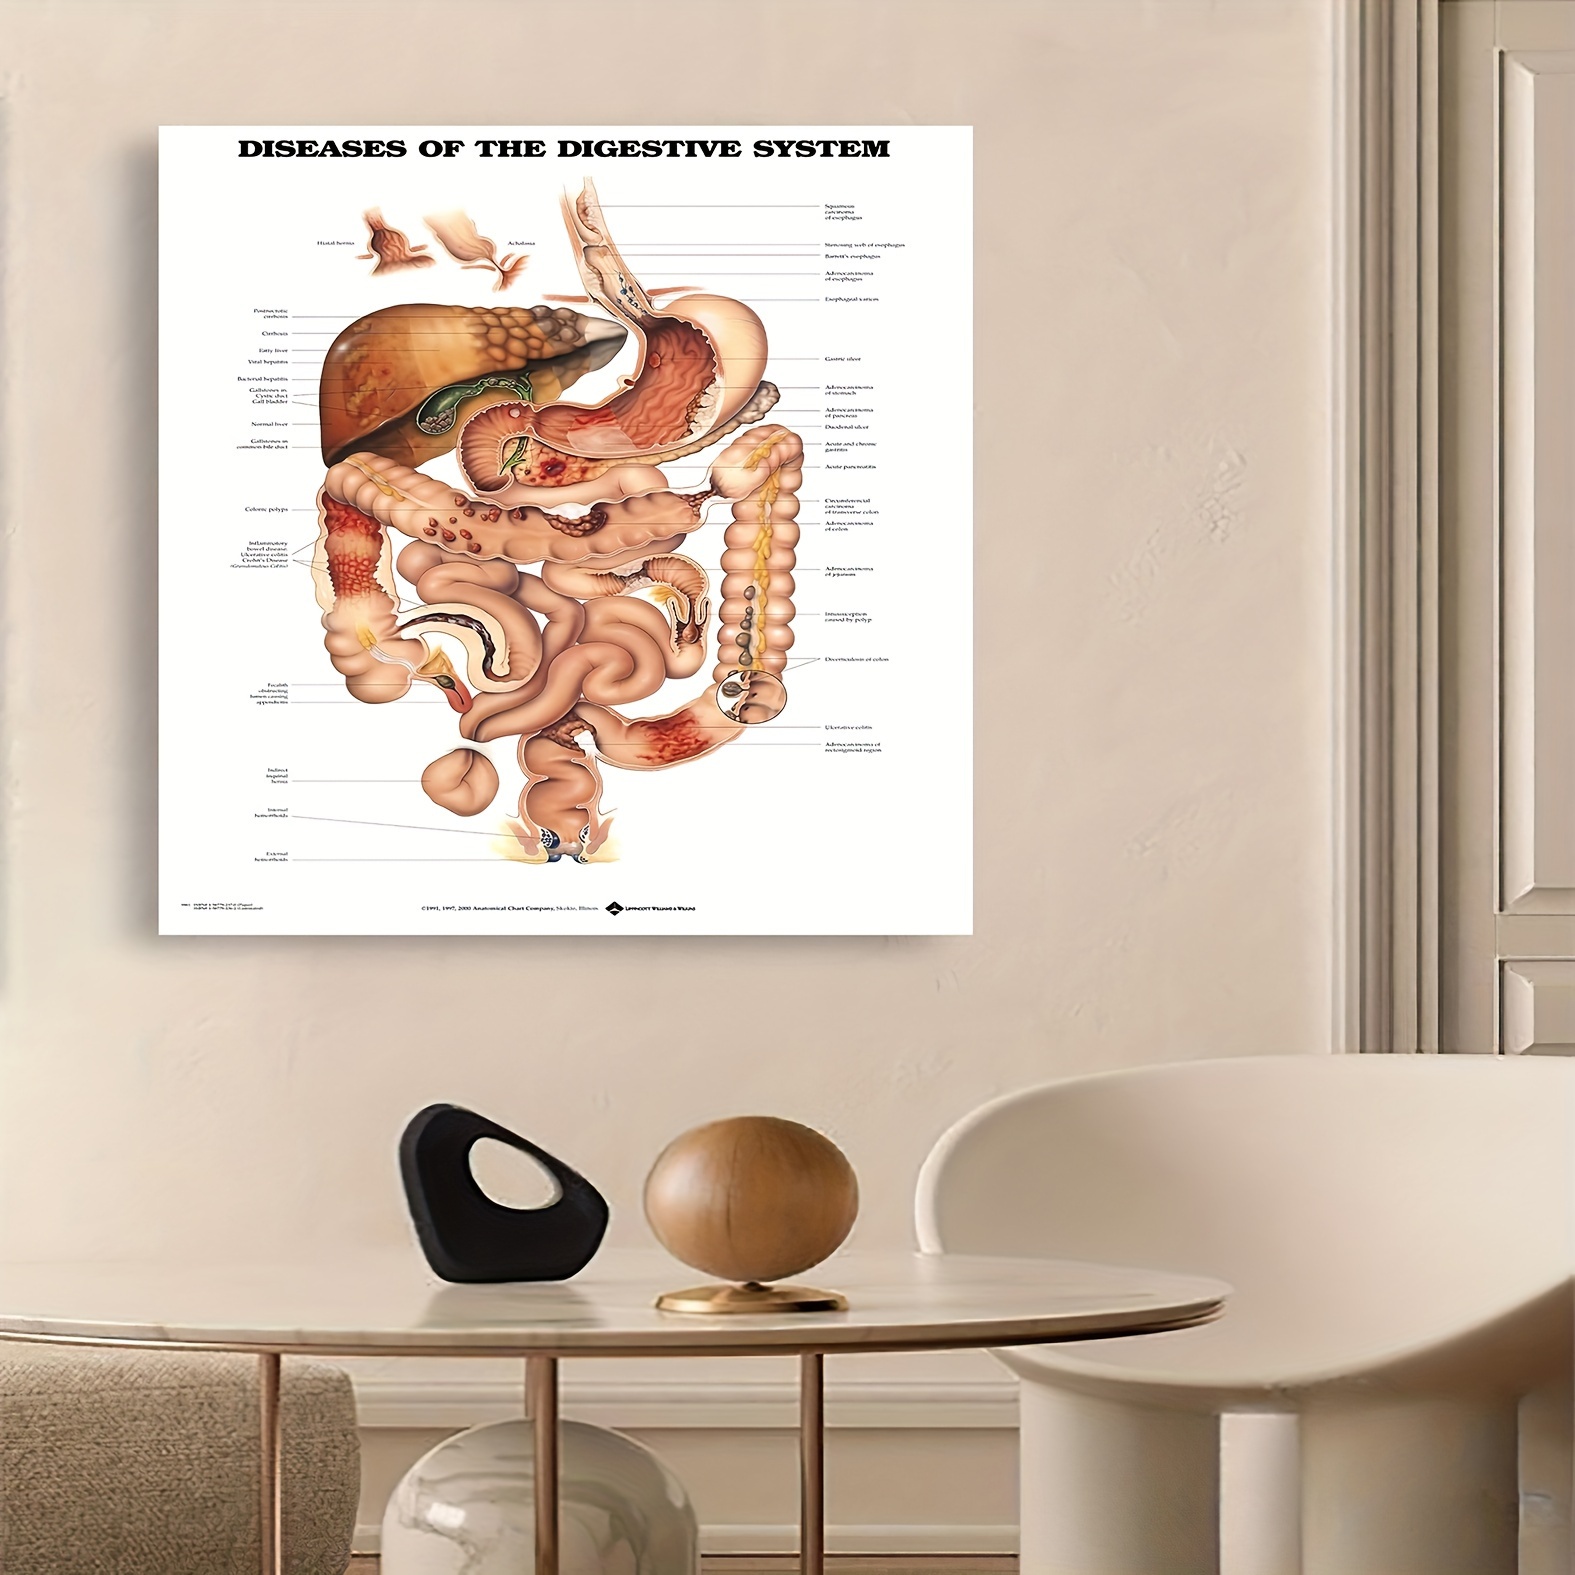 

Human Digestive System Anatomy Poster: Educational Medical Illustration For Classrooms, Halls, Or Home Decor - Framed Canvas Art